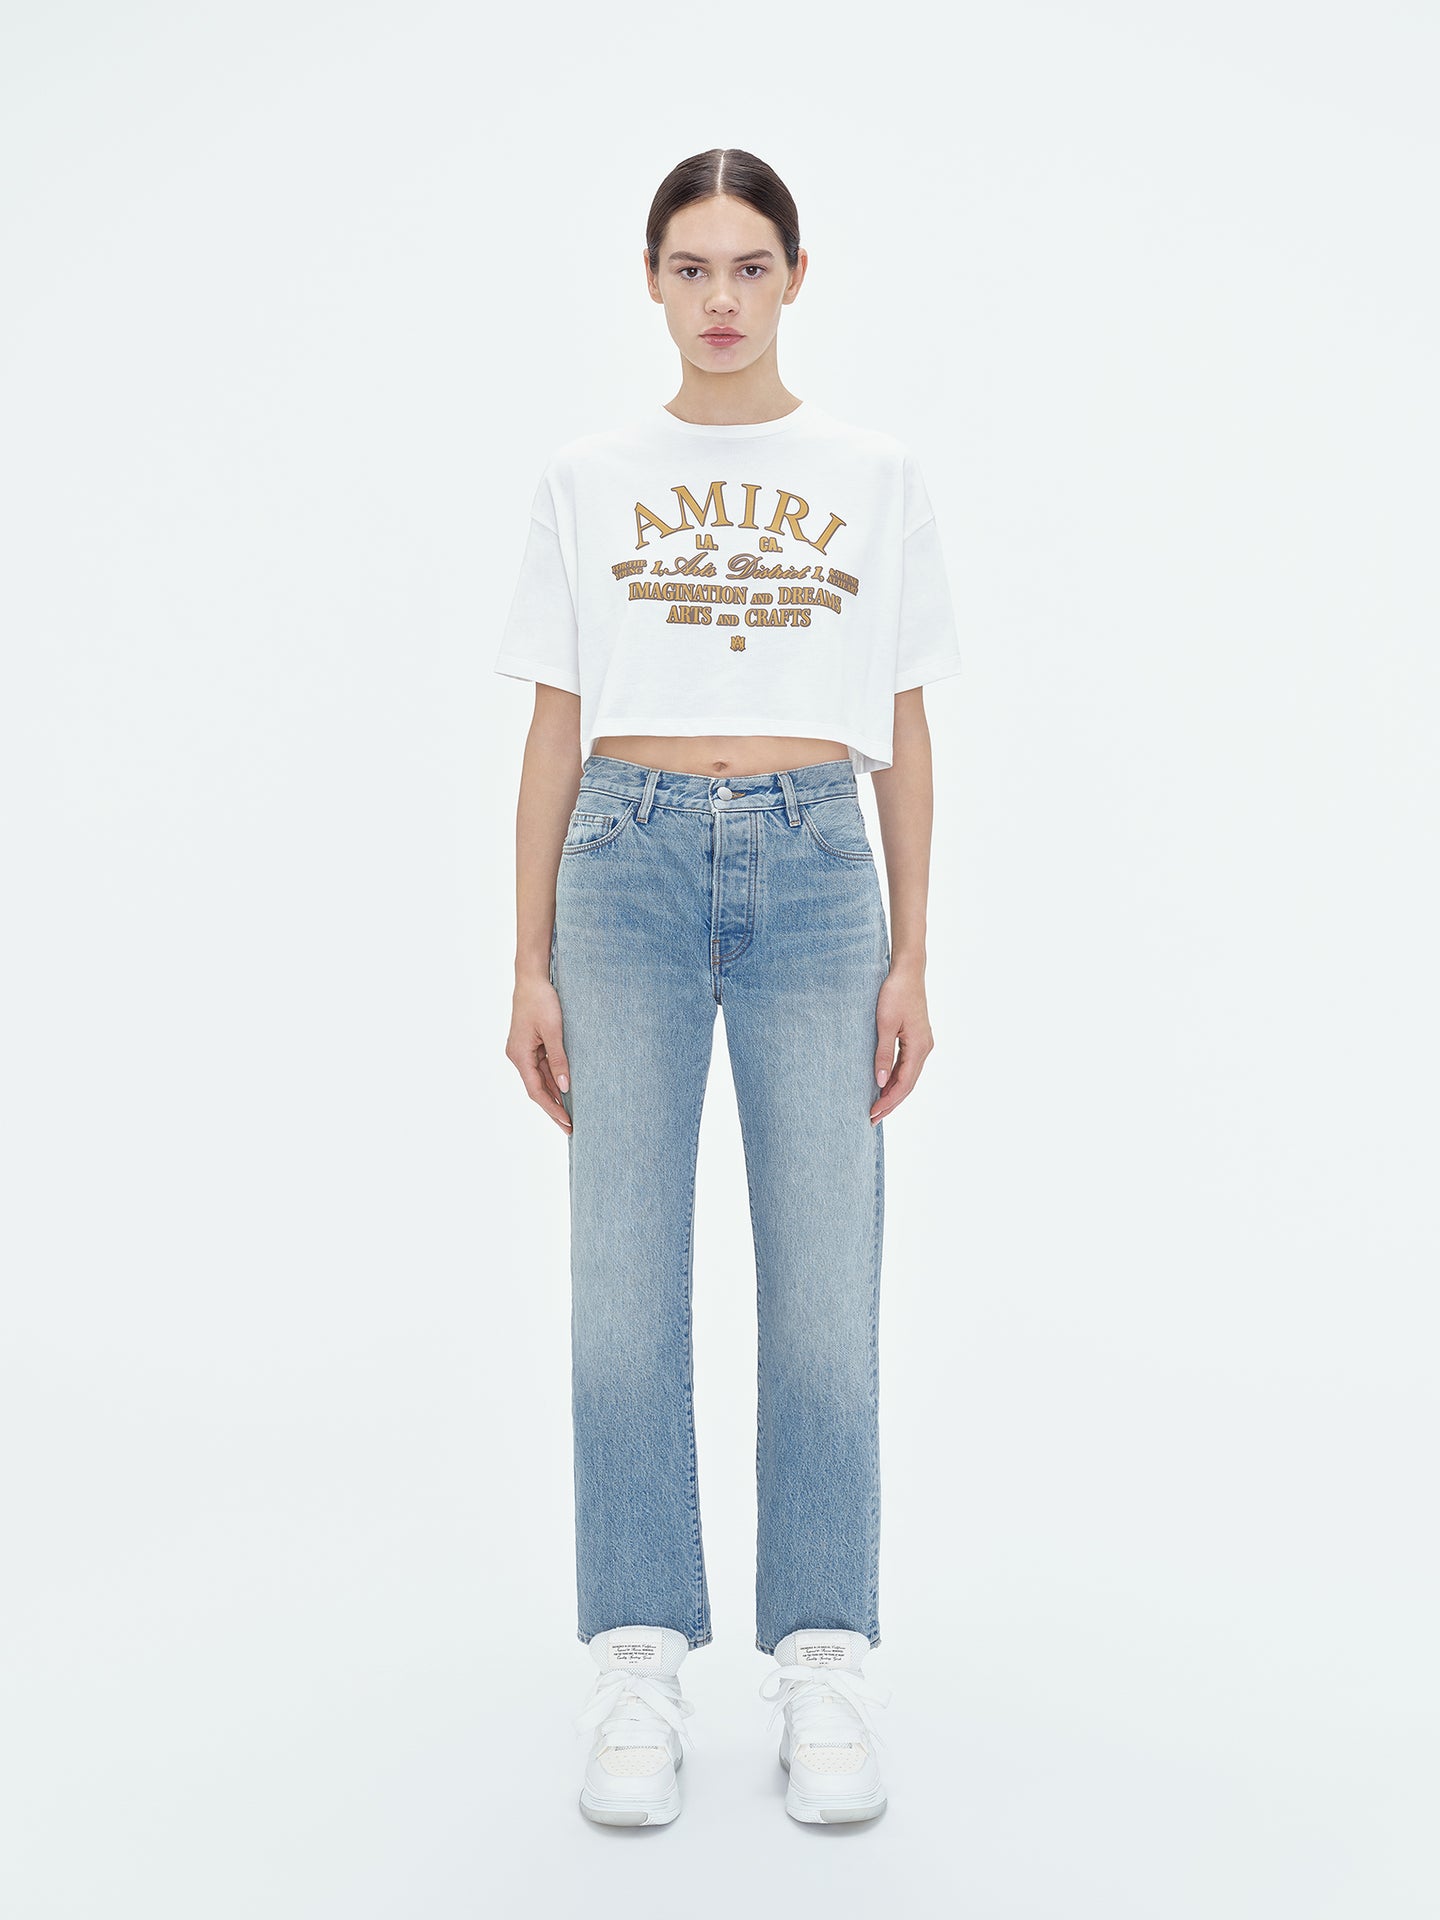 WOMEN - ARTS DISTRICT CROPPED TEE - White